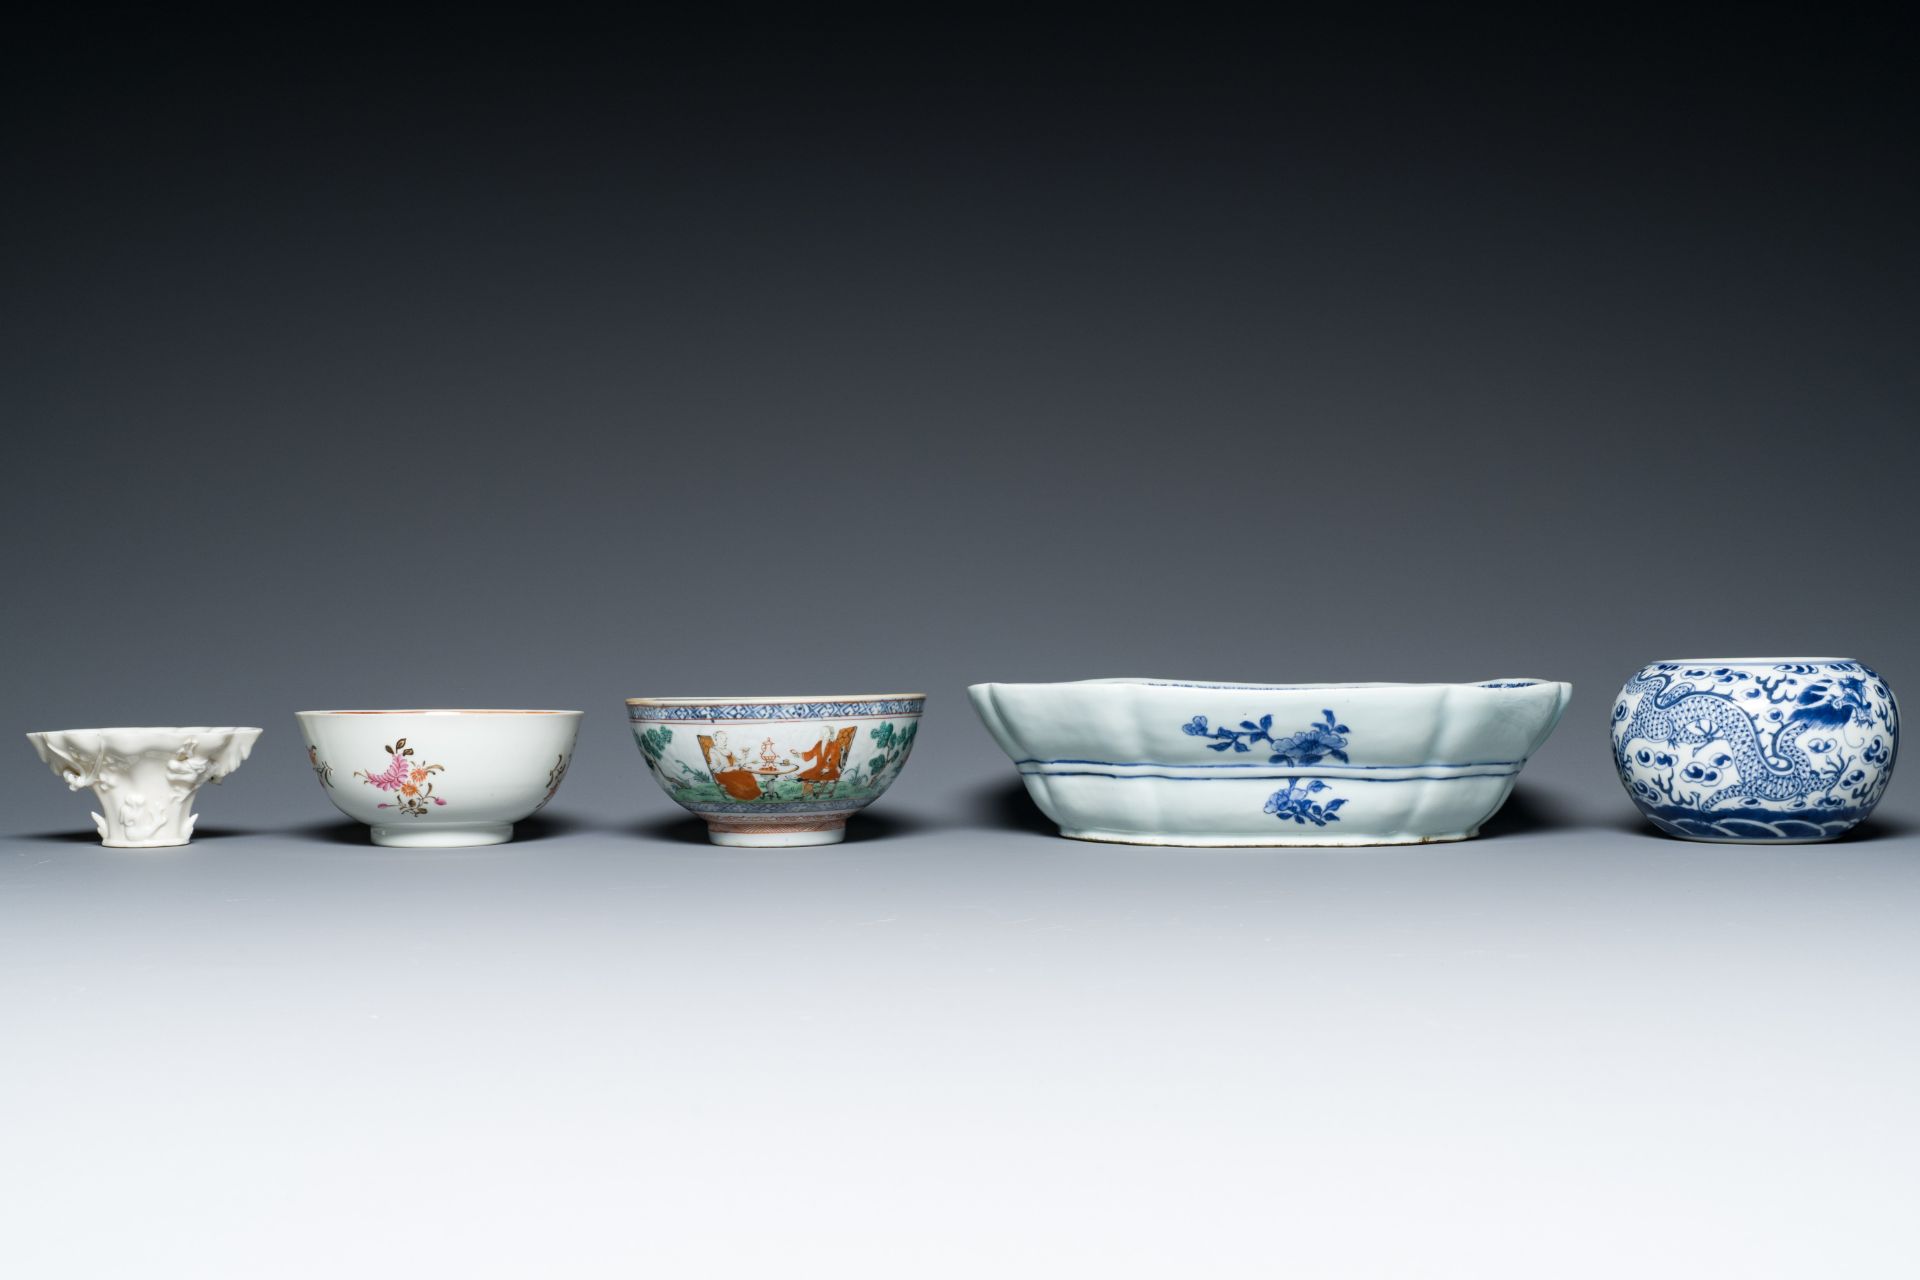 A varied collection of Chinese porcelain, 18/19th C. - Image 3 of 9